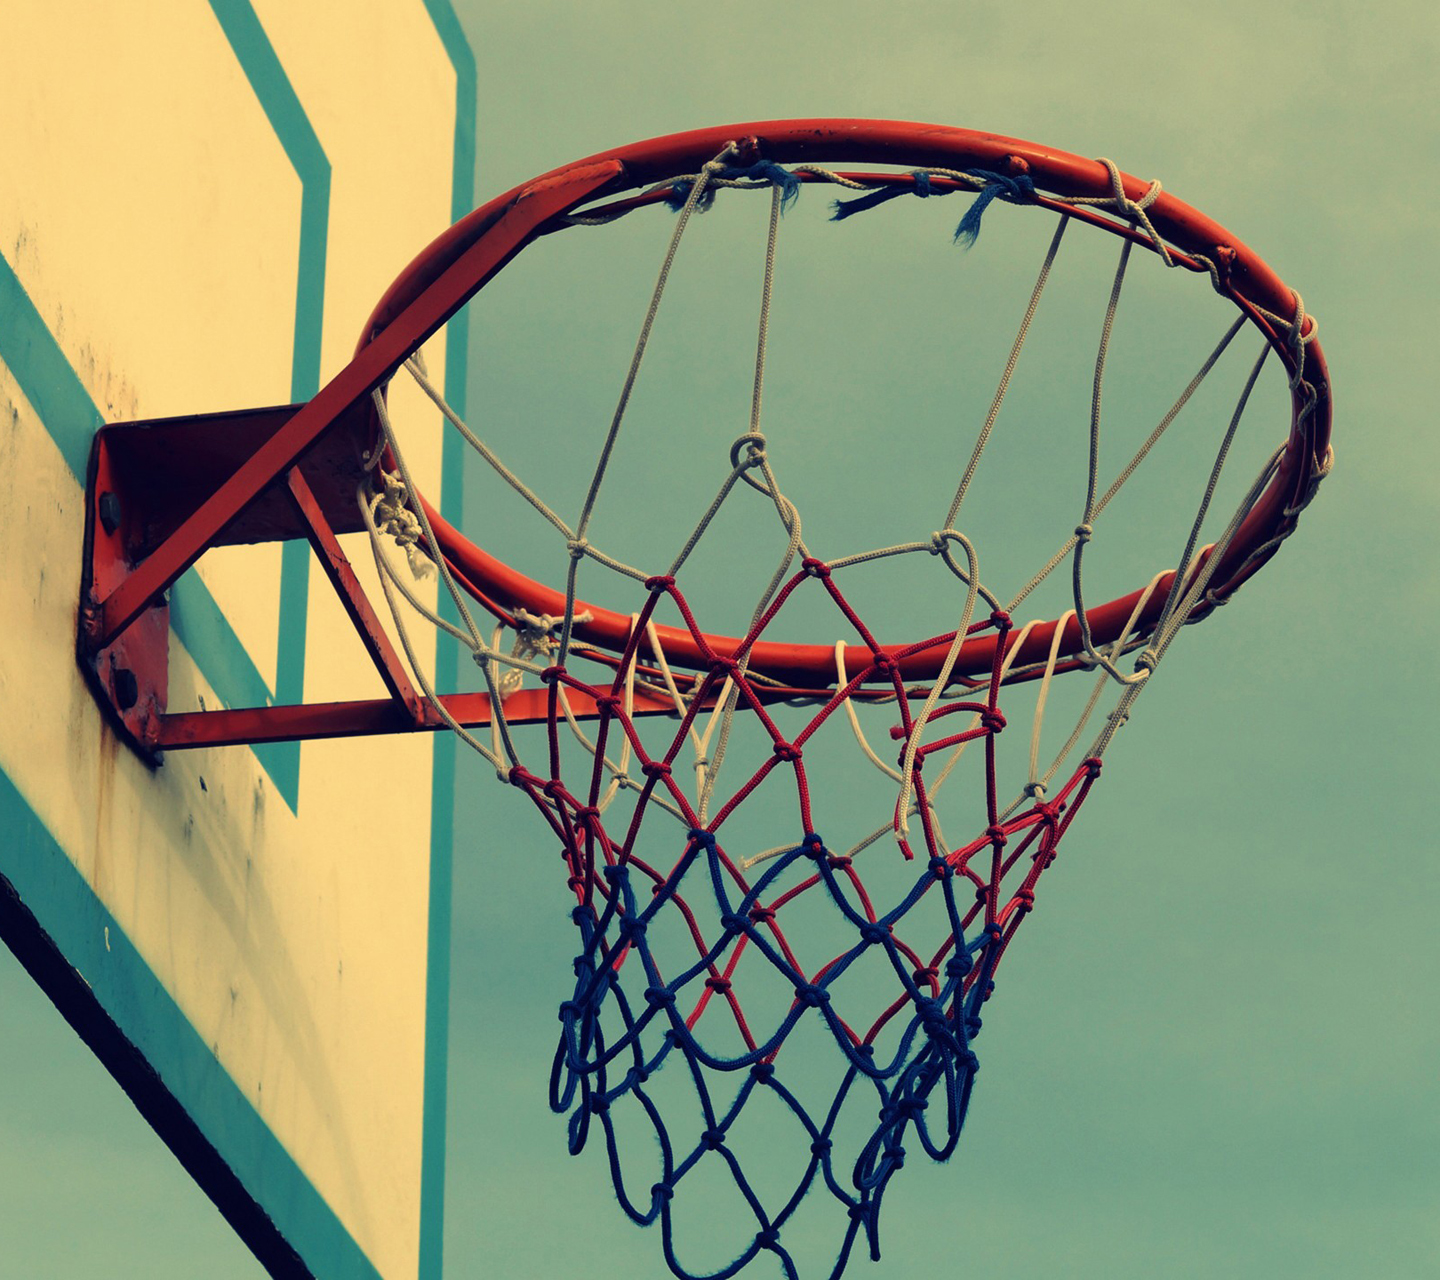 Galaxy S3 Wallpaper - Basketball - HD Wallpapers - 9to5Wallpapers